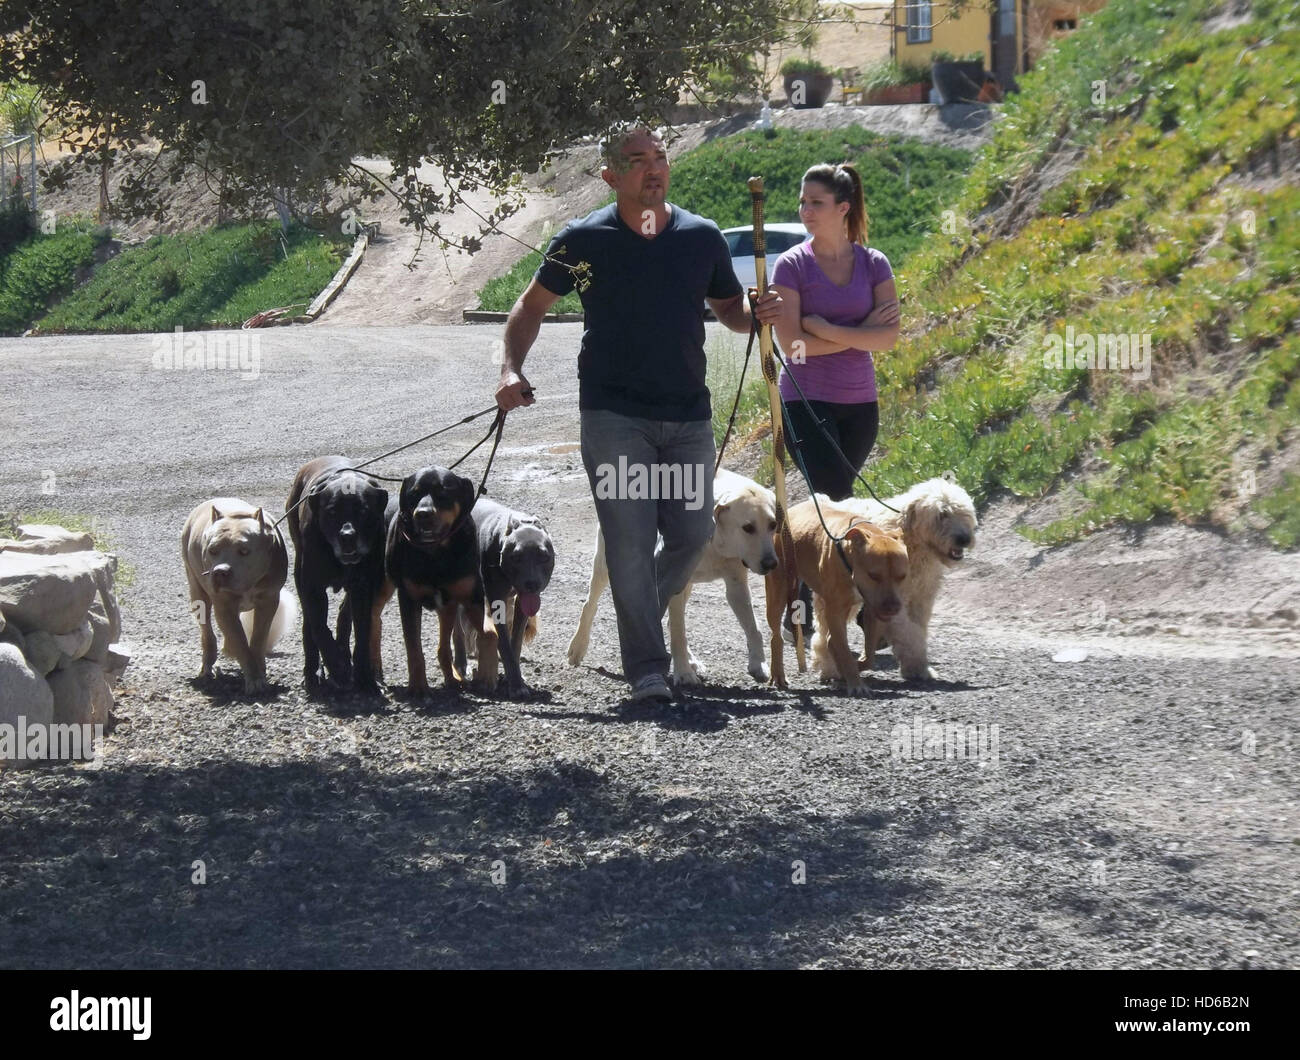 CESAR 911, Cesar Millan in 'Ripped Apart' (Season 1, Episode 5, aired April  4, 2014). ©Nat Geo Wild/courtesy Everett Collection Stock Photo - Alamy